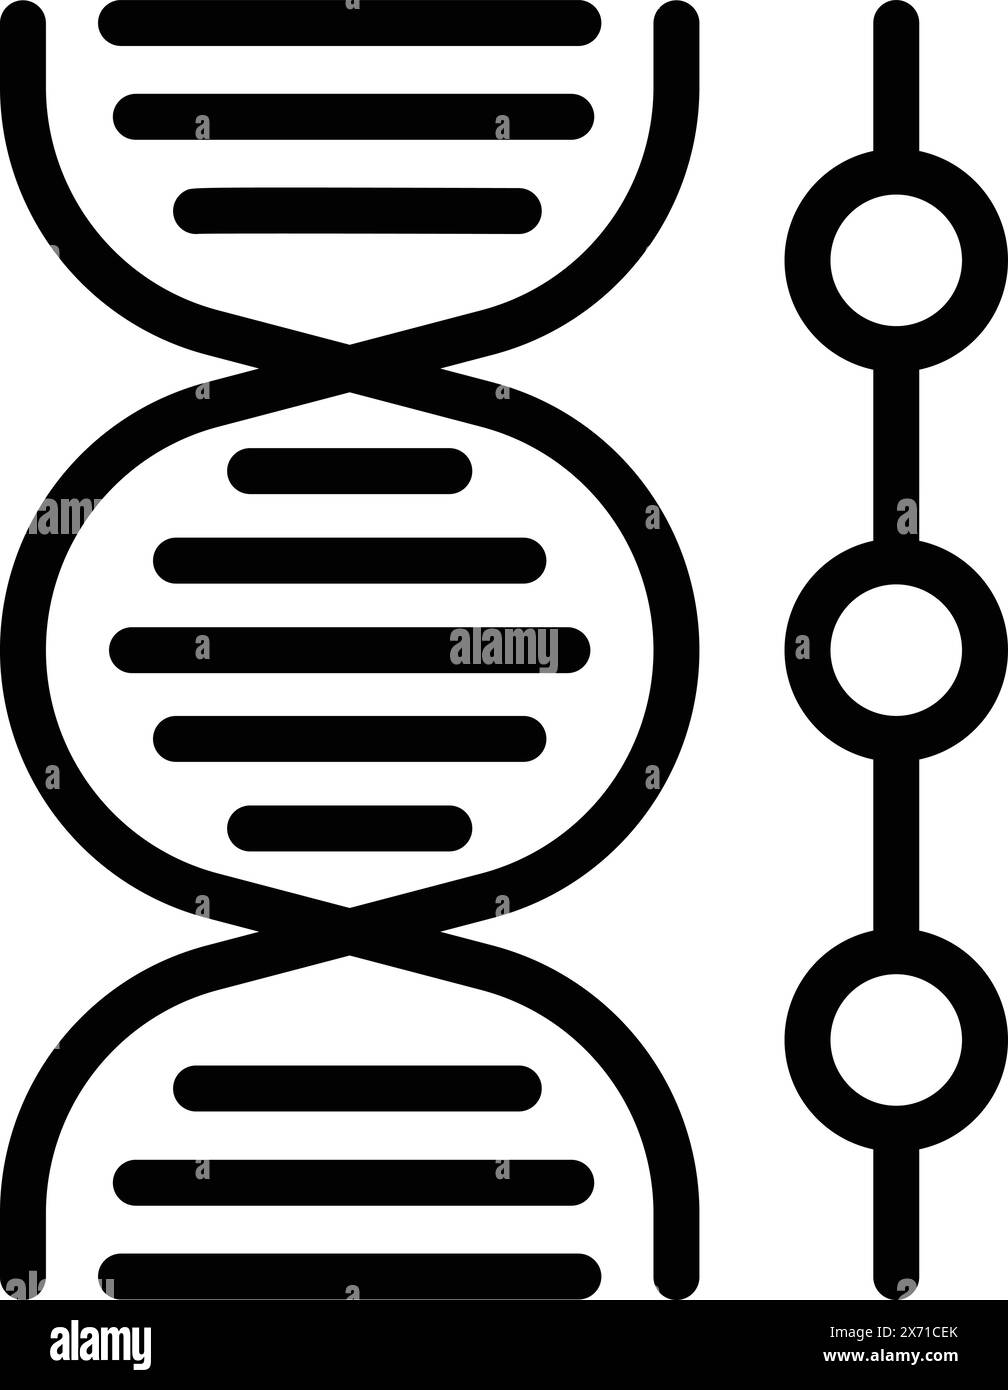 Vector illustration of dna strand icon in black and white, representing the double helix structure of deoxyribonucleic acid dna perfect for scientific, medical, and genetic design projects Stock Vector